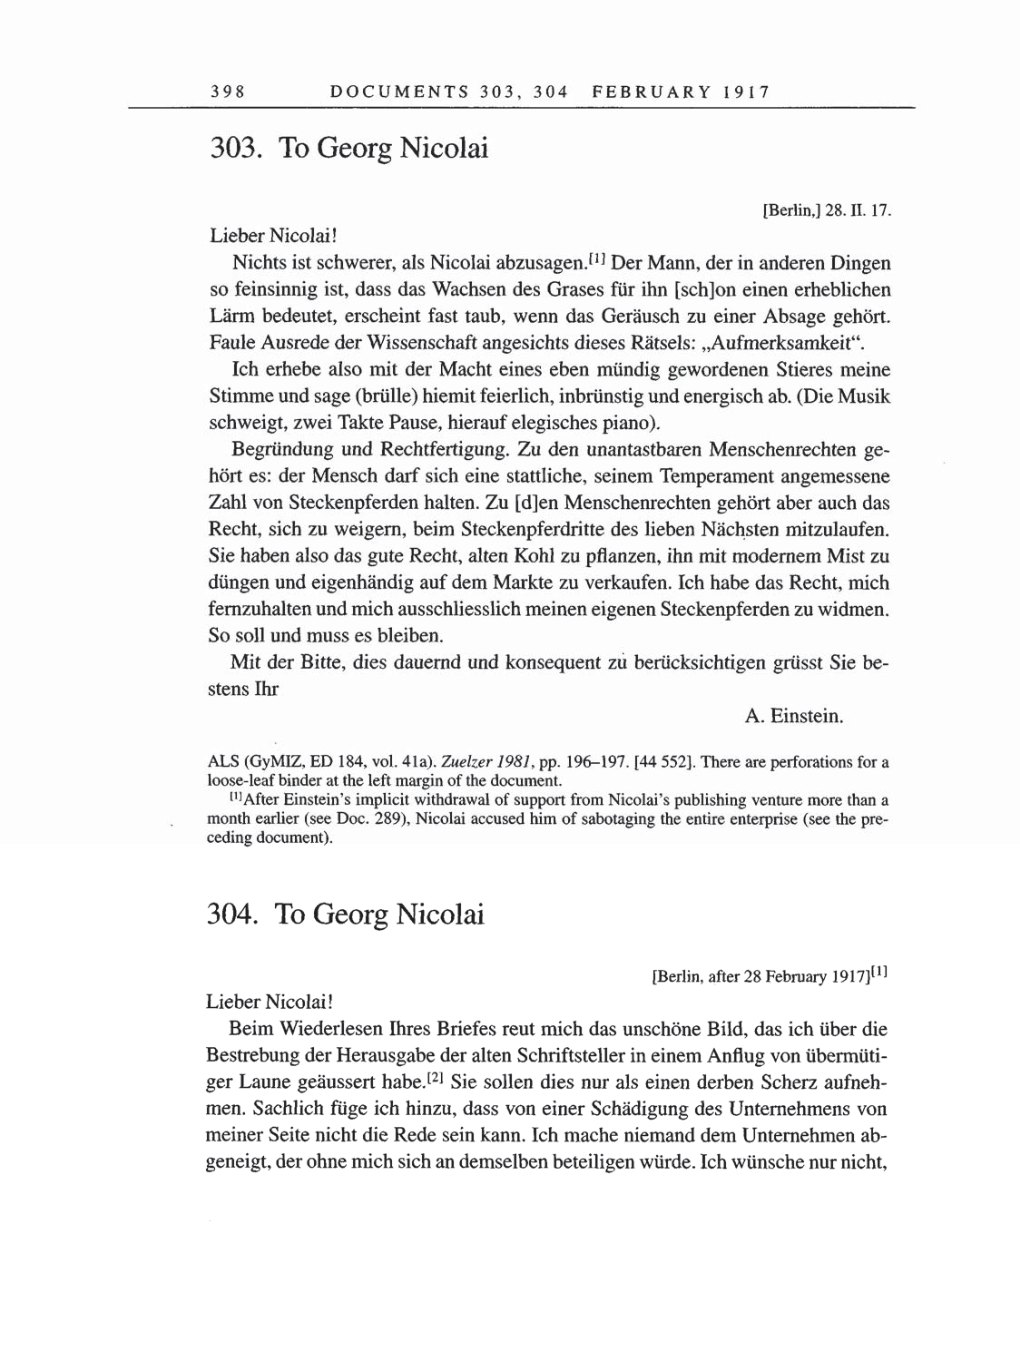 Volume 8, Part A: The Berlin Years: Correspondence 1914-1917 page 398